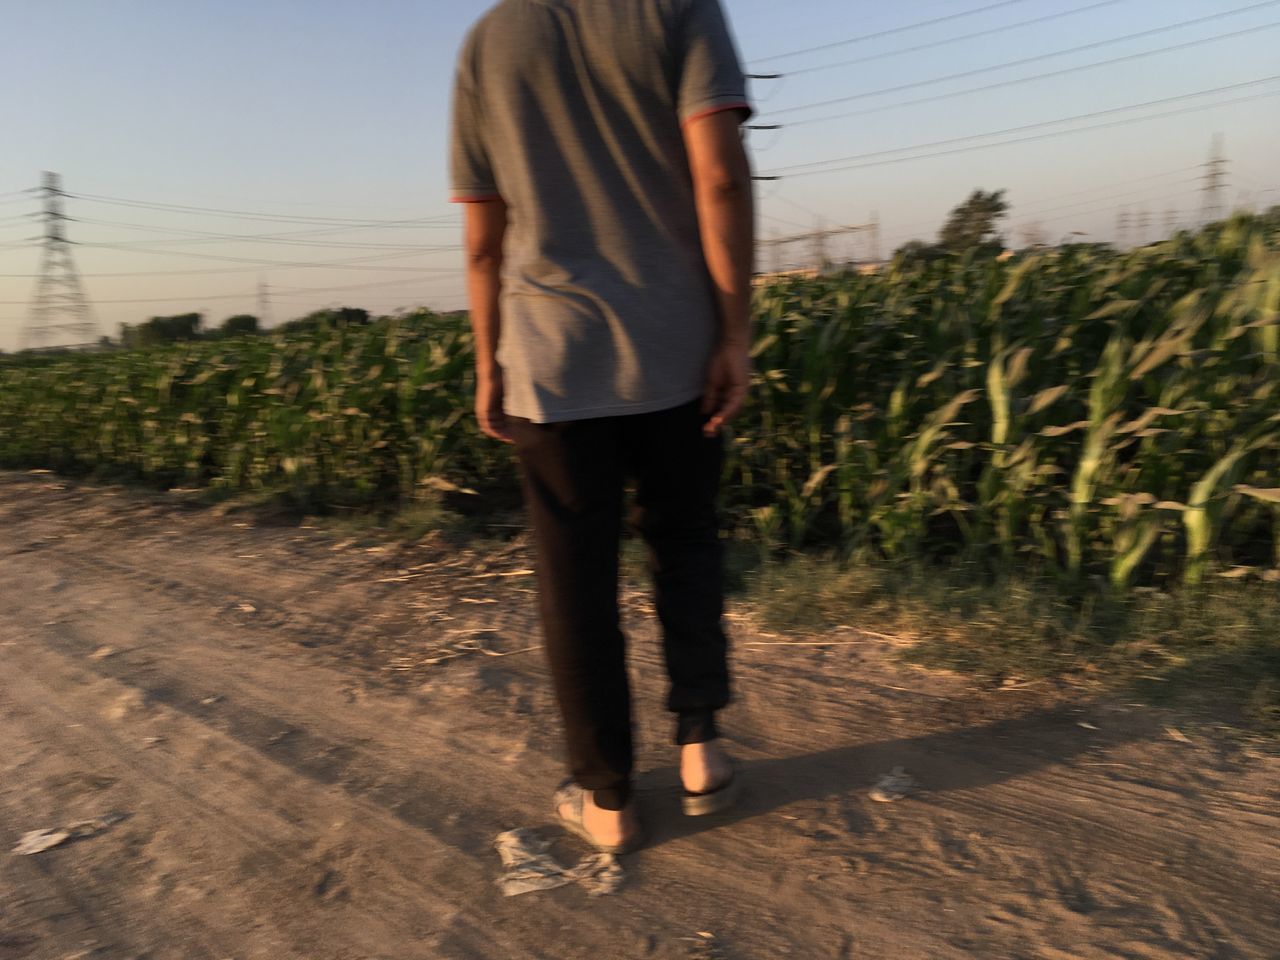 one person, standing, nature, sky, adult, full length, plant, day, spring, casual clothing, rear view, walking, footwear, land, lifestyles, young adult, growth, clothing, outdoors, leisure activity, soil, women, footpath, rural scene, agriculture, landscape, shoe, road, field, sunlight